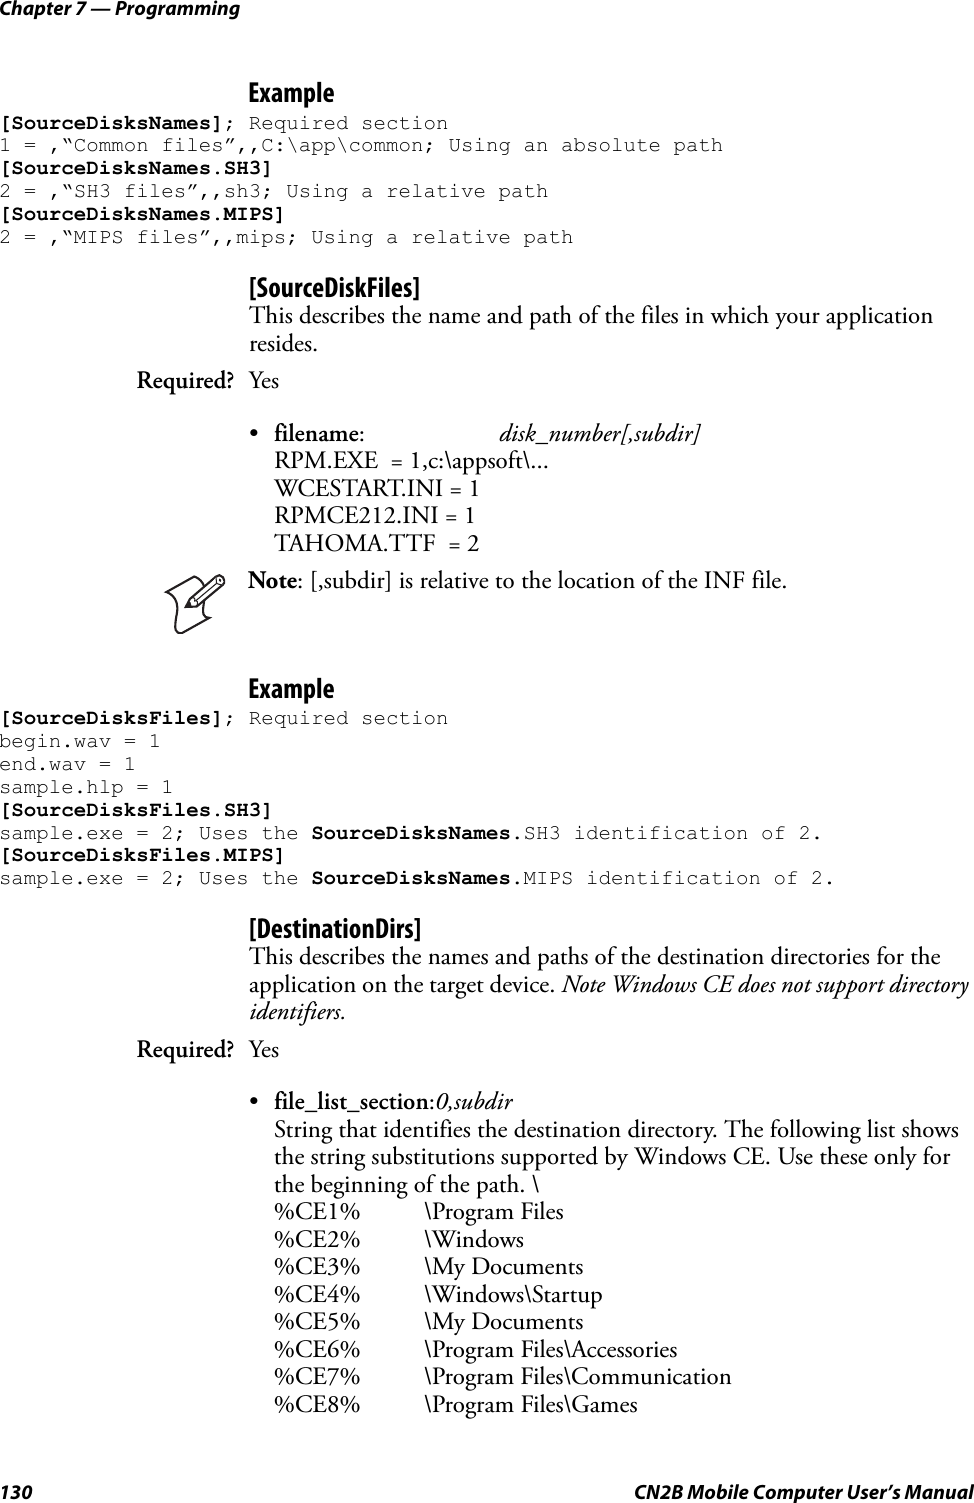 Chapter 7 — Programming130 CN2B Mobile Computer User’s ManualExample[SourceDisksNames]; Required section 1 = ,“Common files”,,C:\app\common; Using an absolute path[SourceDisksNames.SH3]2 = ,“SH3 files”,,sh3; Using a relative path[SourceDisksNames.MIPS]2 = ,“MIPS files”,,mips; Using a relative path[SourceDiskFiles]This describes the name and path of the files in which your application resides.•filename:disk_number[,subdir]RPM.EXE  = 1,c:\appsoft\...WCESTART.INI = 1RPMCE212.INI = 1TAHOMA.TTF  = 2Example[SourceDisksFiles]; Required sectionbegin.wav = 1 end.wav = 1 sample.hlp = 1 [SourceDisksFiles.SH3] sample.exe = 2; Uses the SourceDisksNames.SH3 identification of 2.[SourceDisksFiles.MIPS] sample.exe = 2; Uses the SourceDisksNames.MIPS identification of 2.[DestinationDirs]This describes the names and paths of the destination directories for the application on the target device. Note Windows CE does not support directory identifiers.•file_list_section:0,subdirString that identifies the destination directory. The following list shows the string substitutions supported by Windows CE. Use these only for the beginning of the path. \%CE1% \Program Files%CE2% \Windows%CE3% \My Documents%CE4% \Windows\Startup%CE5% \My Documents%CE6% \Program Files\Accessories%CE7% \Program Files\Communication%CE8% \Program Files\GamesRequired? YesNote: [,subdir] is relative to the location of the INF file.Required? Yes